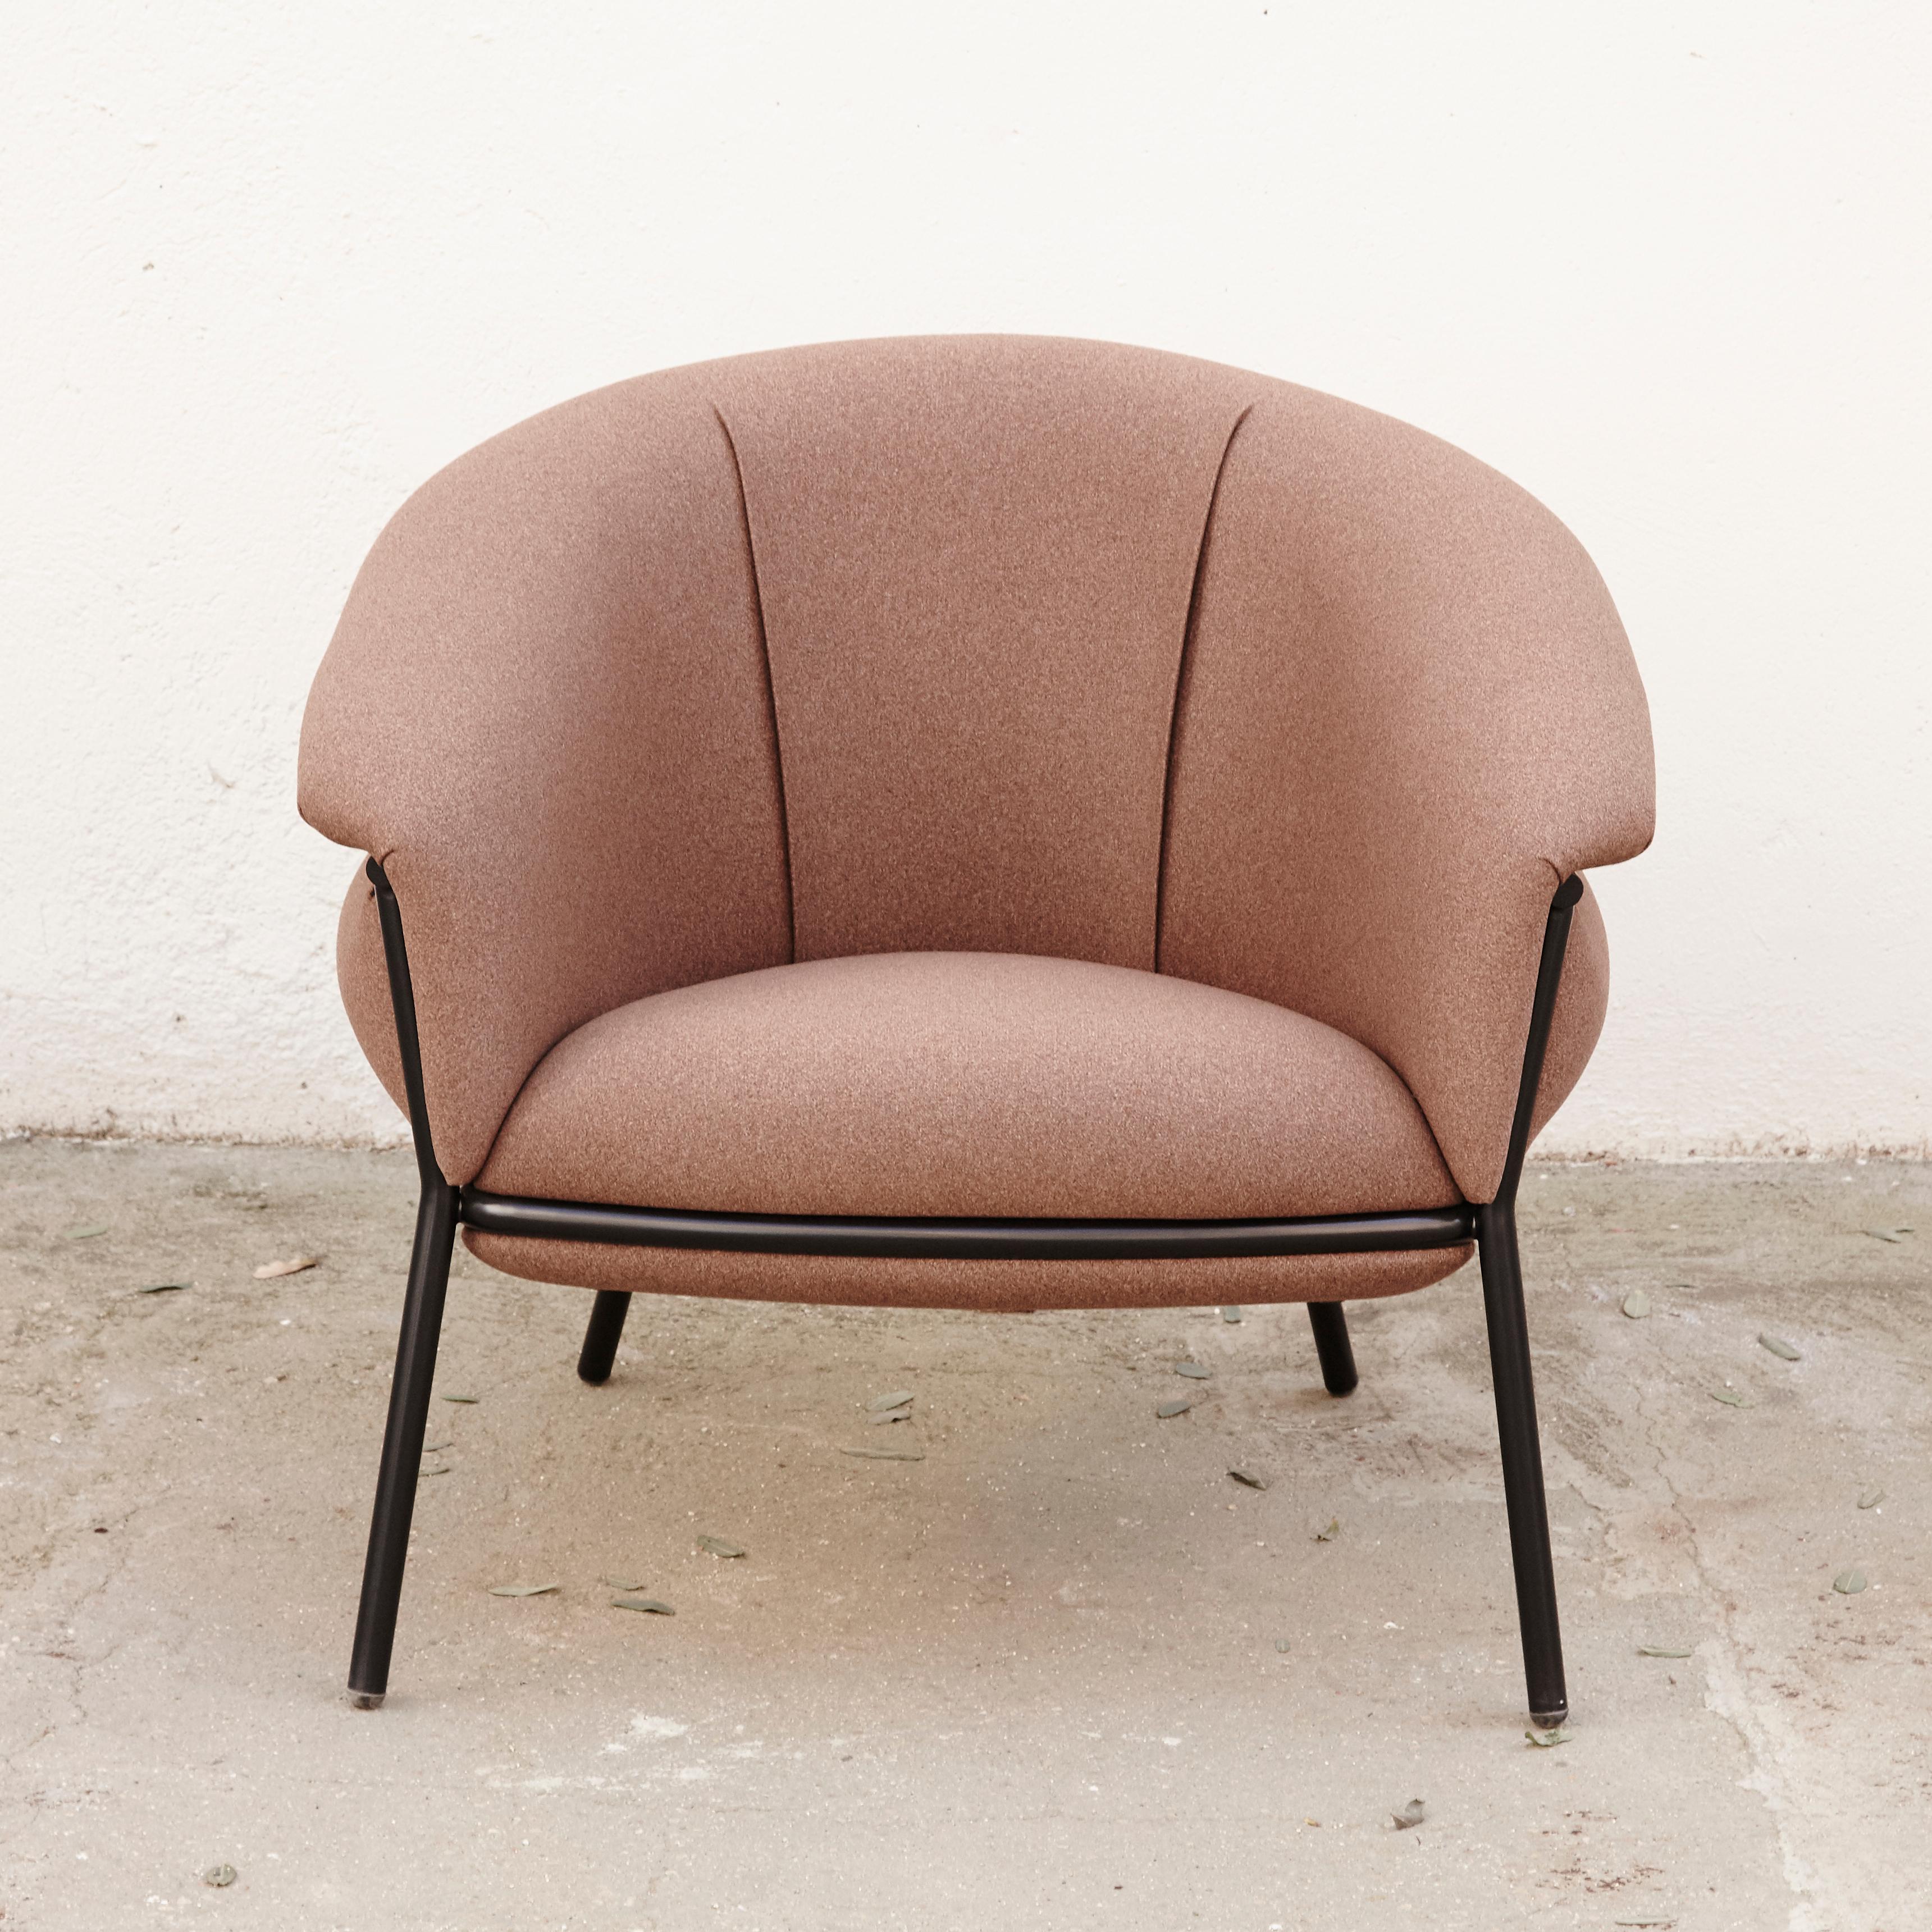 Armchair designed by Stephen Bruks manufactured by BD Barcelona.

An iron tubular (25 mm) structured armchair. Seat and backrest upholstered in fabric.

The fabric upholstery oozes over the bare iron structure to contrast with the most luxurious